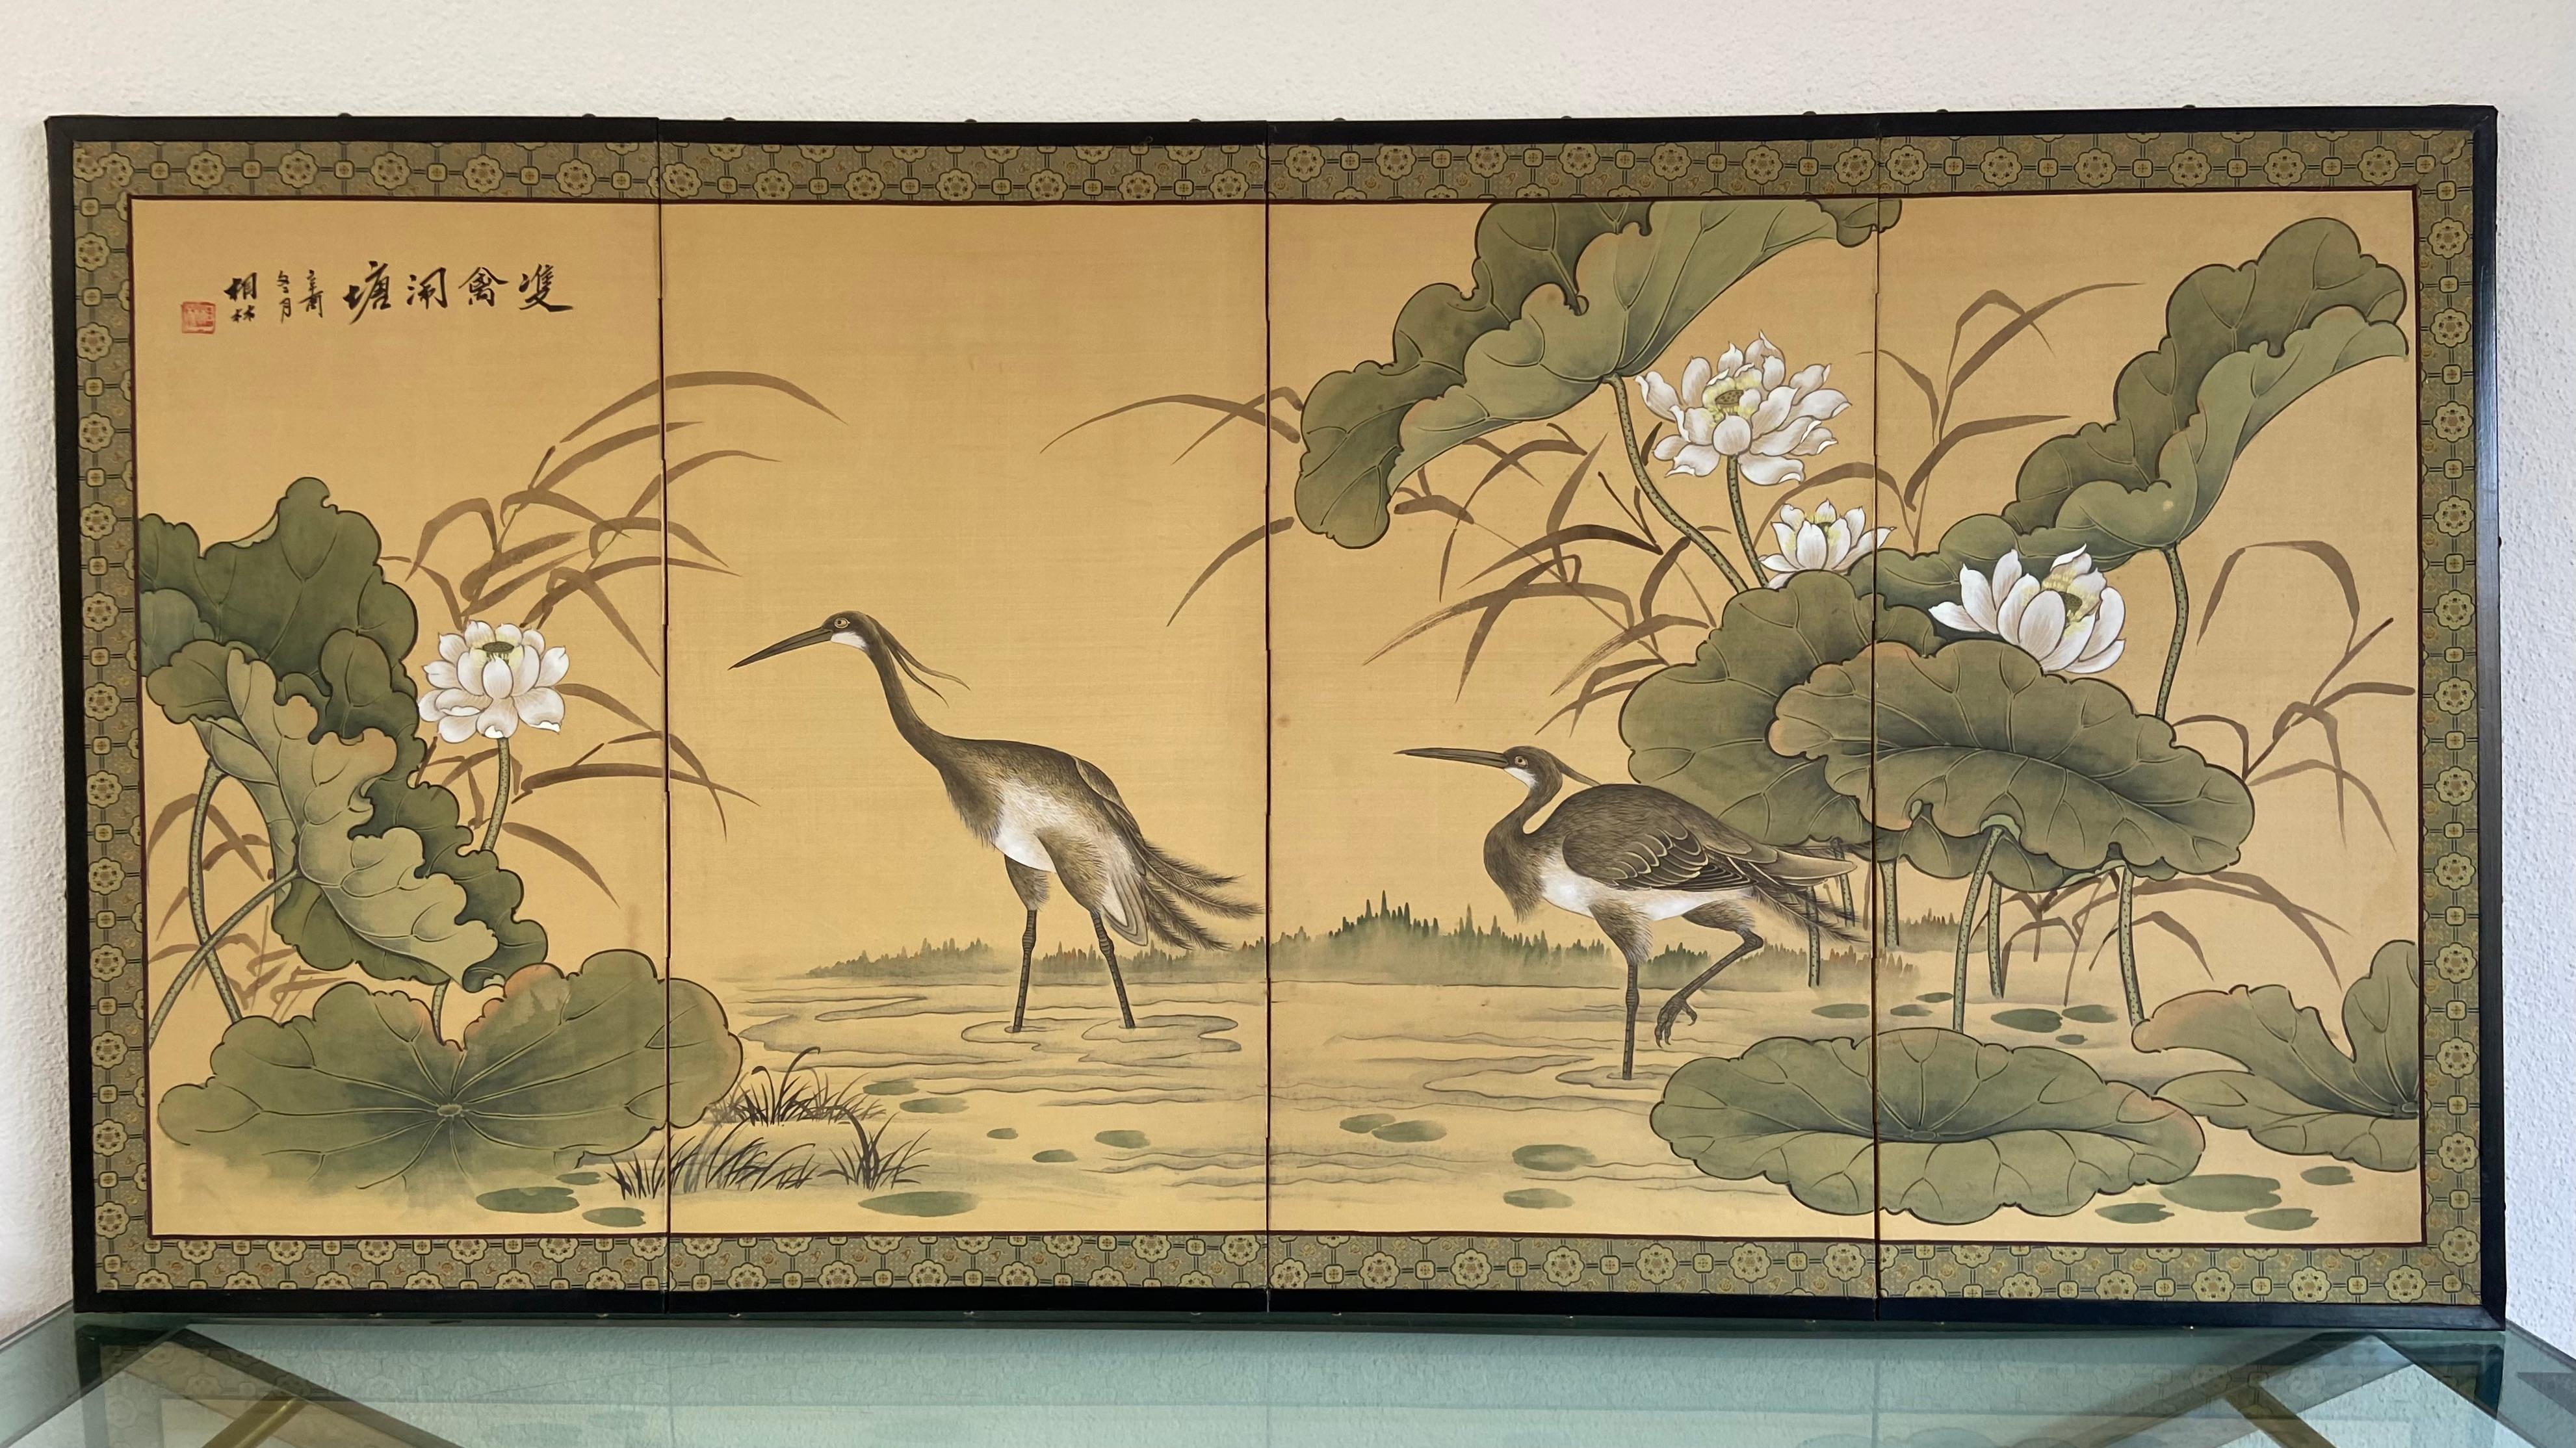 Japanese folding screen in 4 parts. Painted on silk with herons in a landscape. 